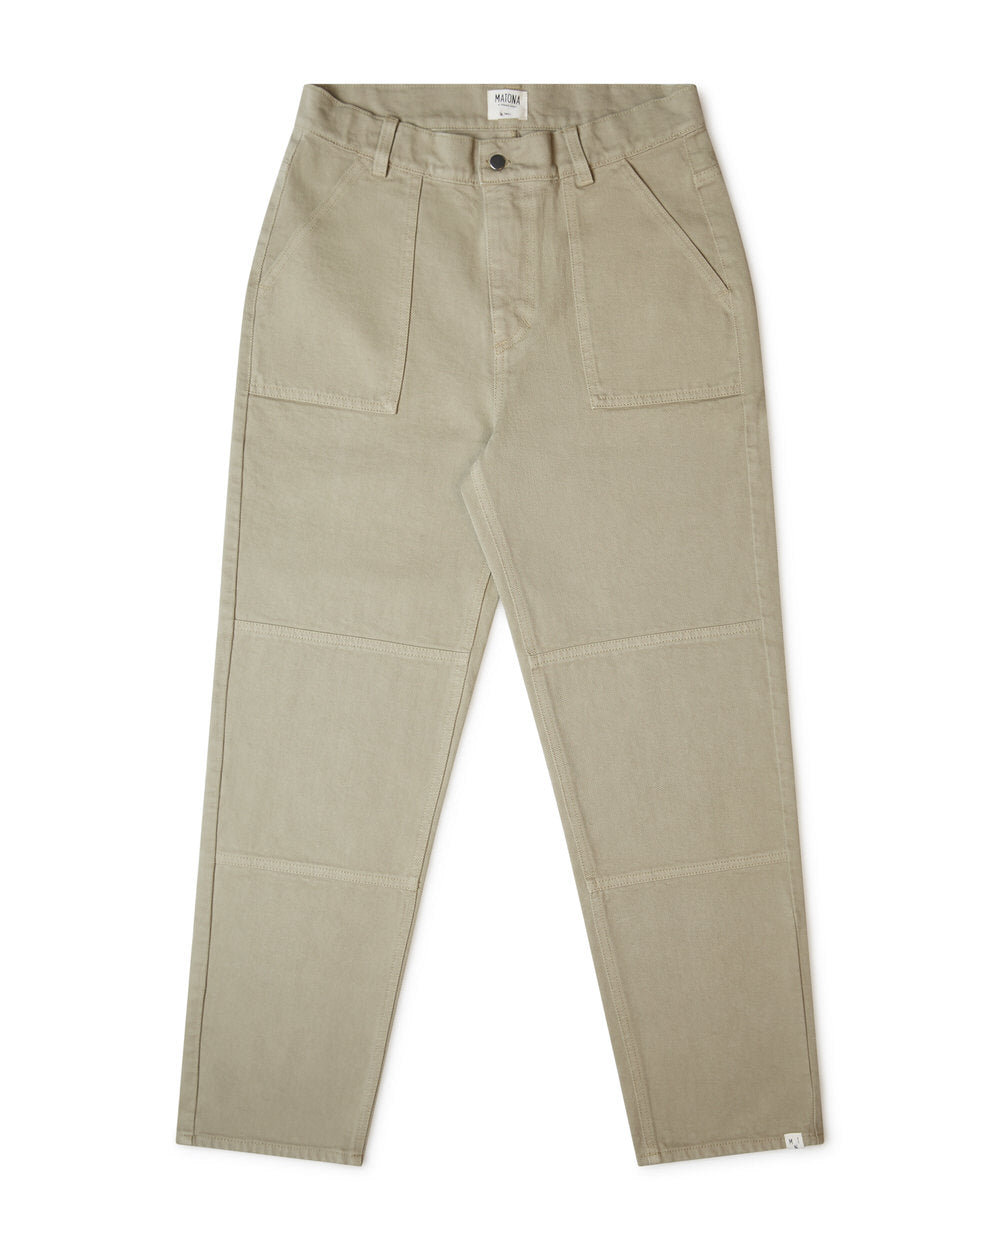 Beige, straight trousers wild sage made from organic cotton by Matona